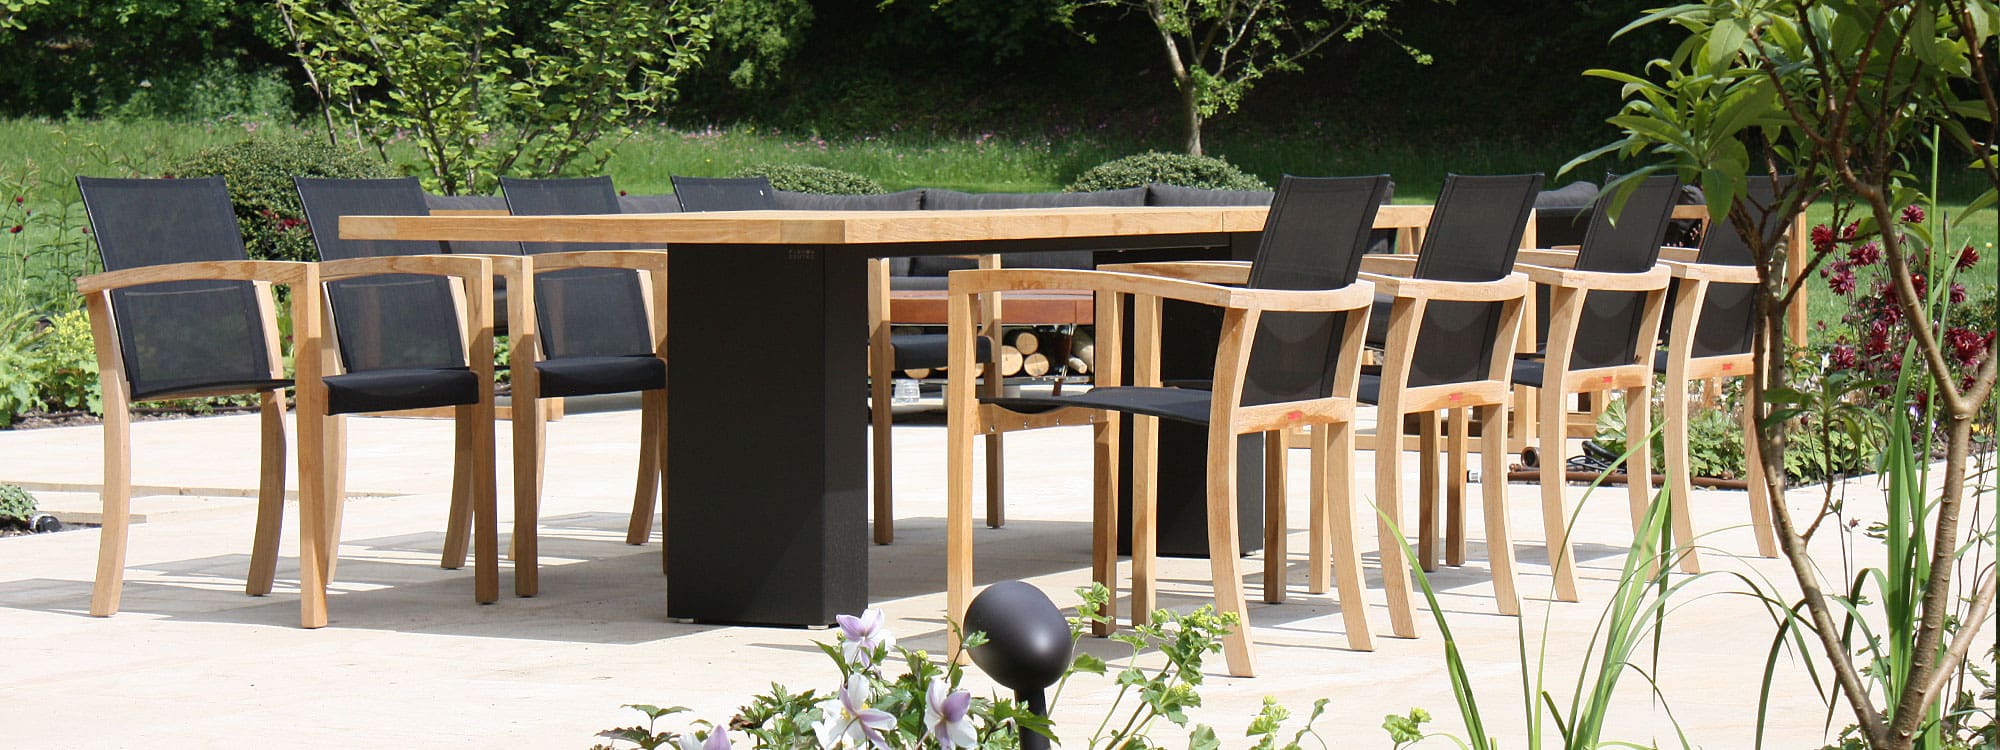 Image of Doble architectural garden table with black pedestal legs and teak top, together with XQI teak and Batyline garden chairs